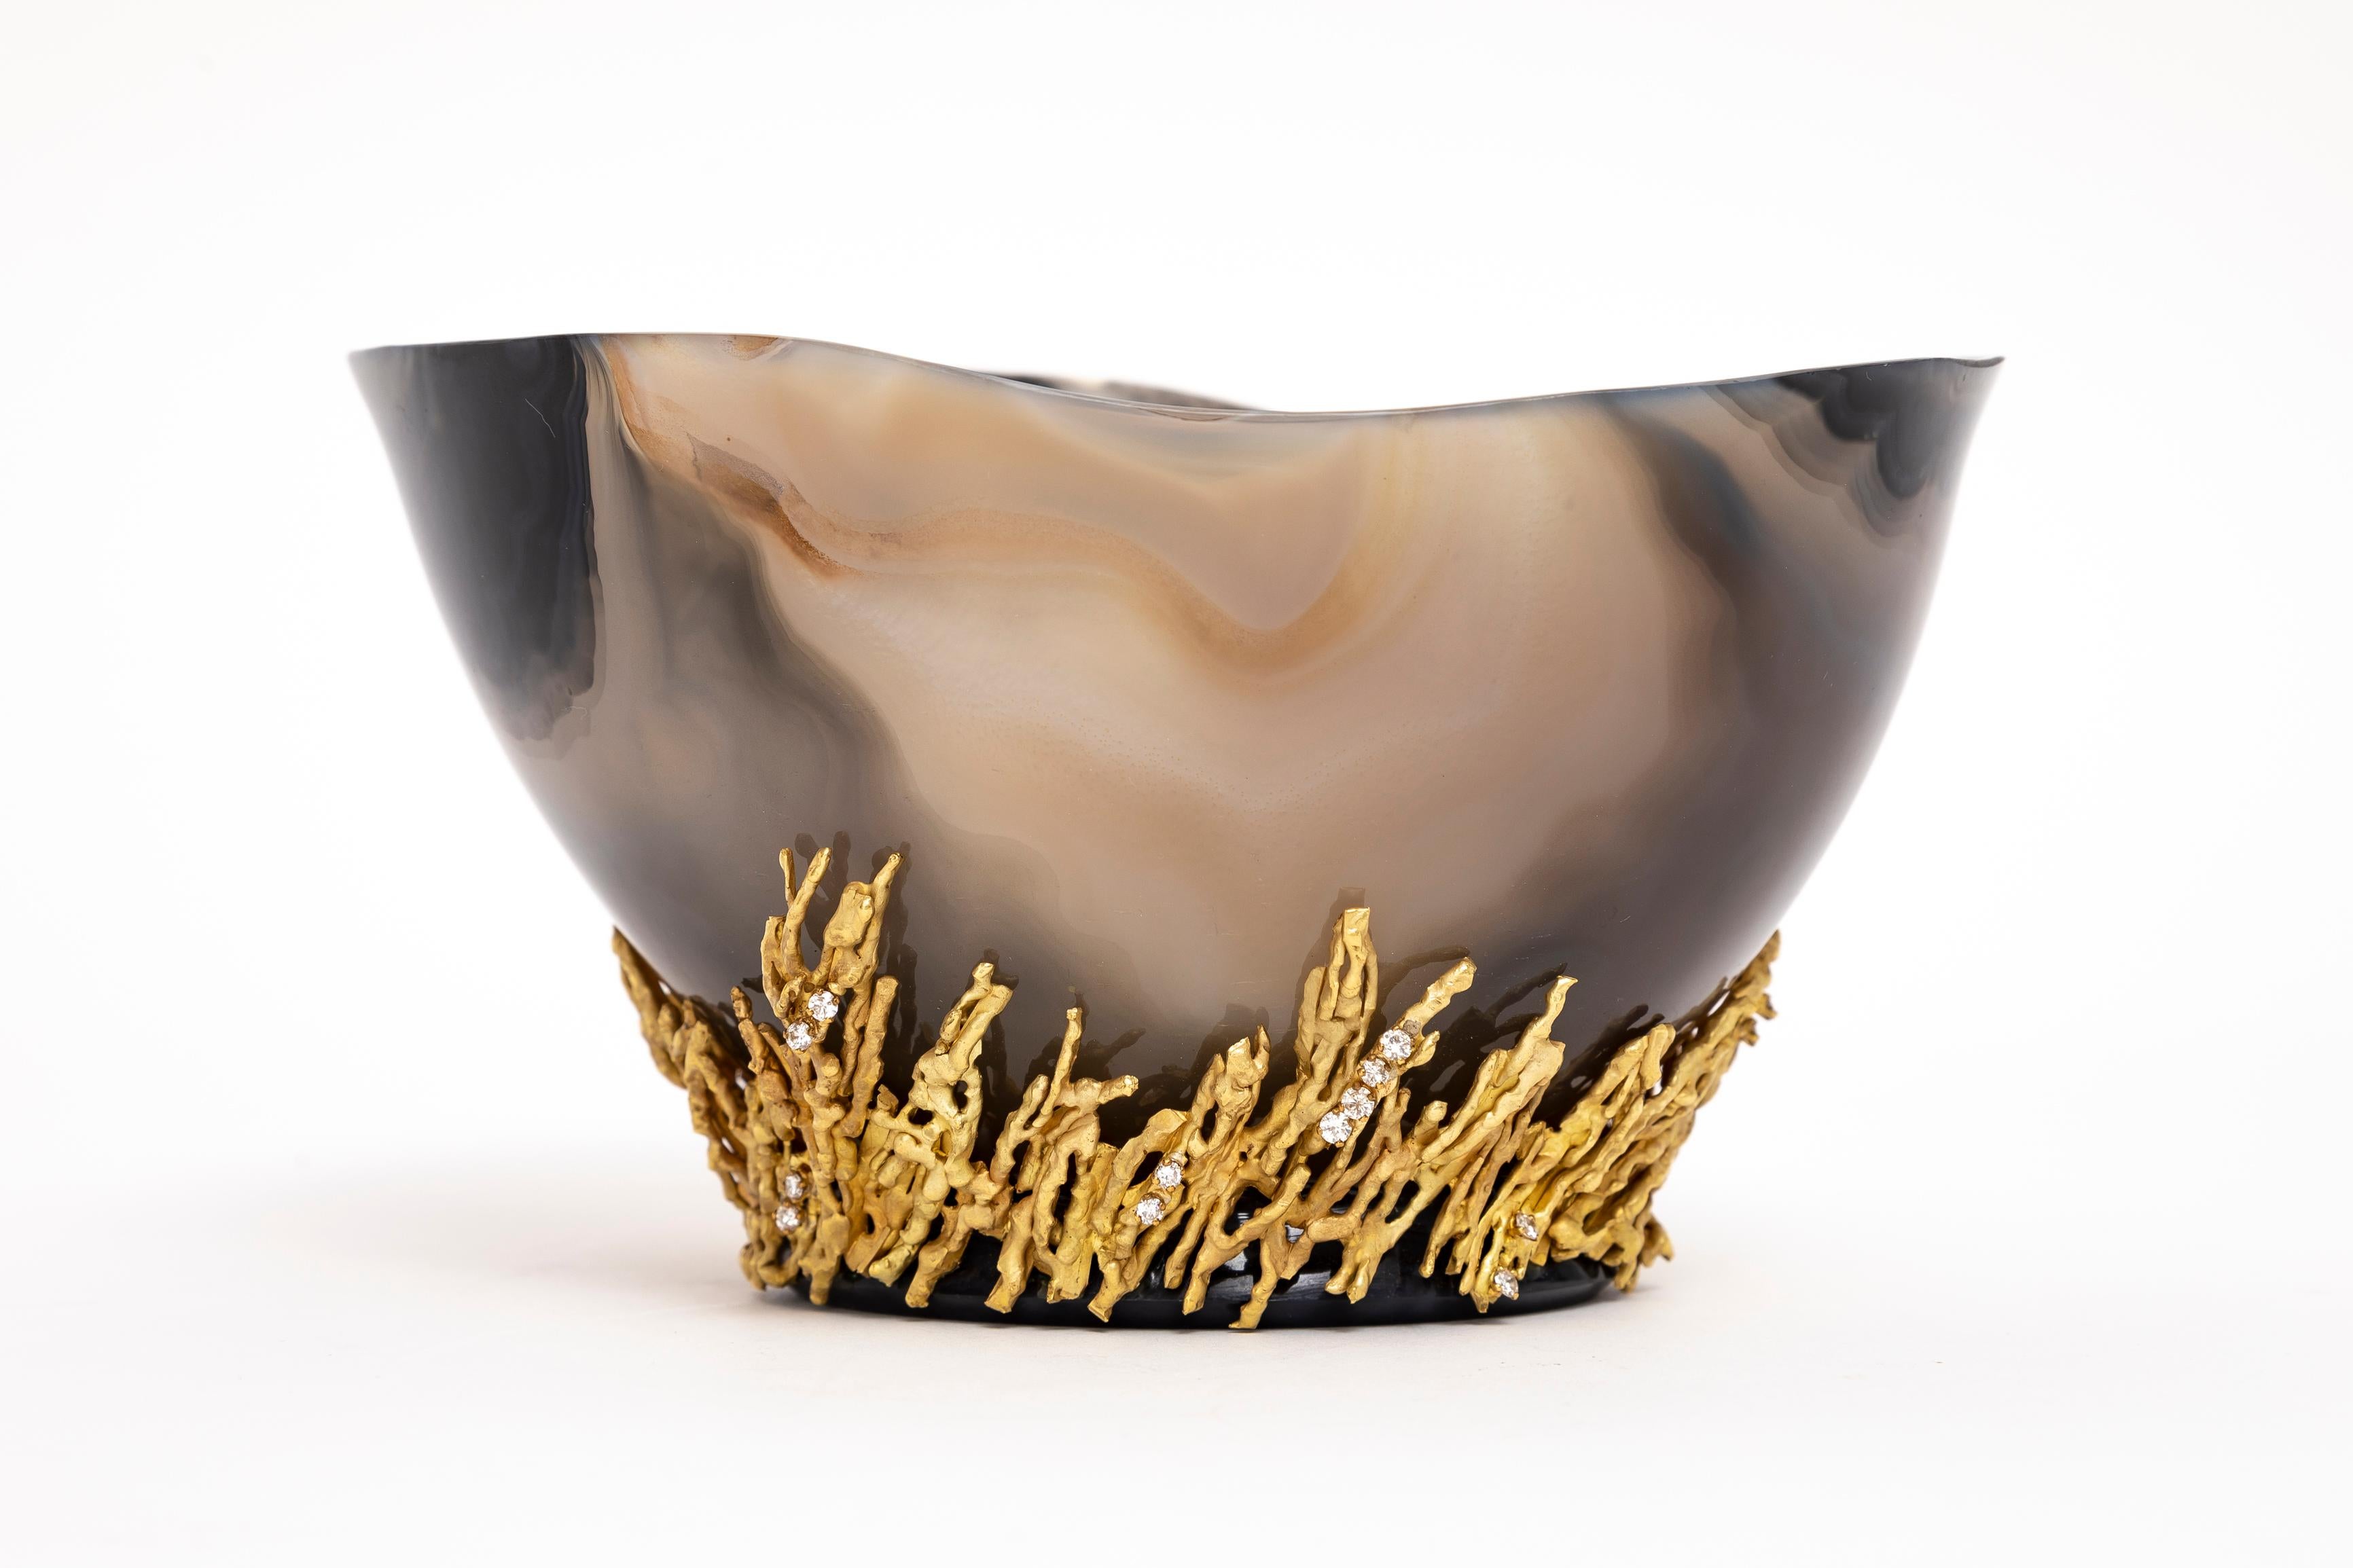 French An Incredible Chaumet Paris Gold & Diamond Mounted Carved Agate Bowl For Sale